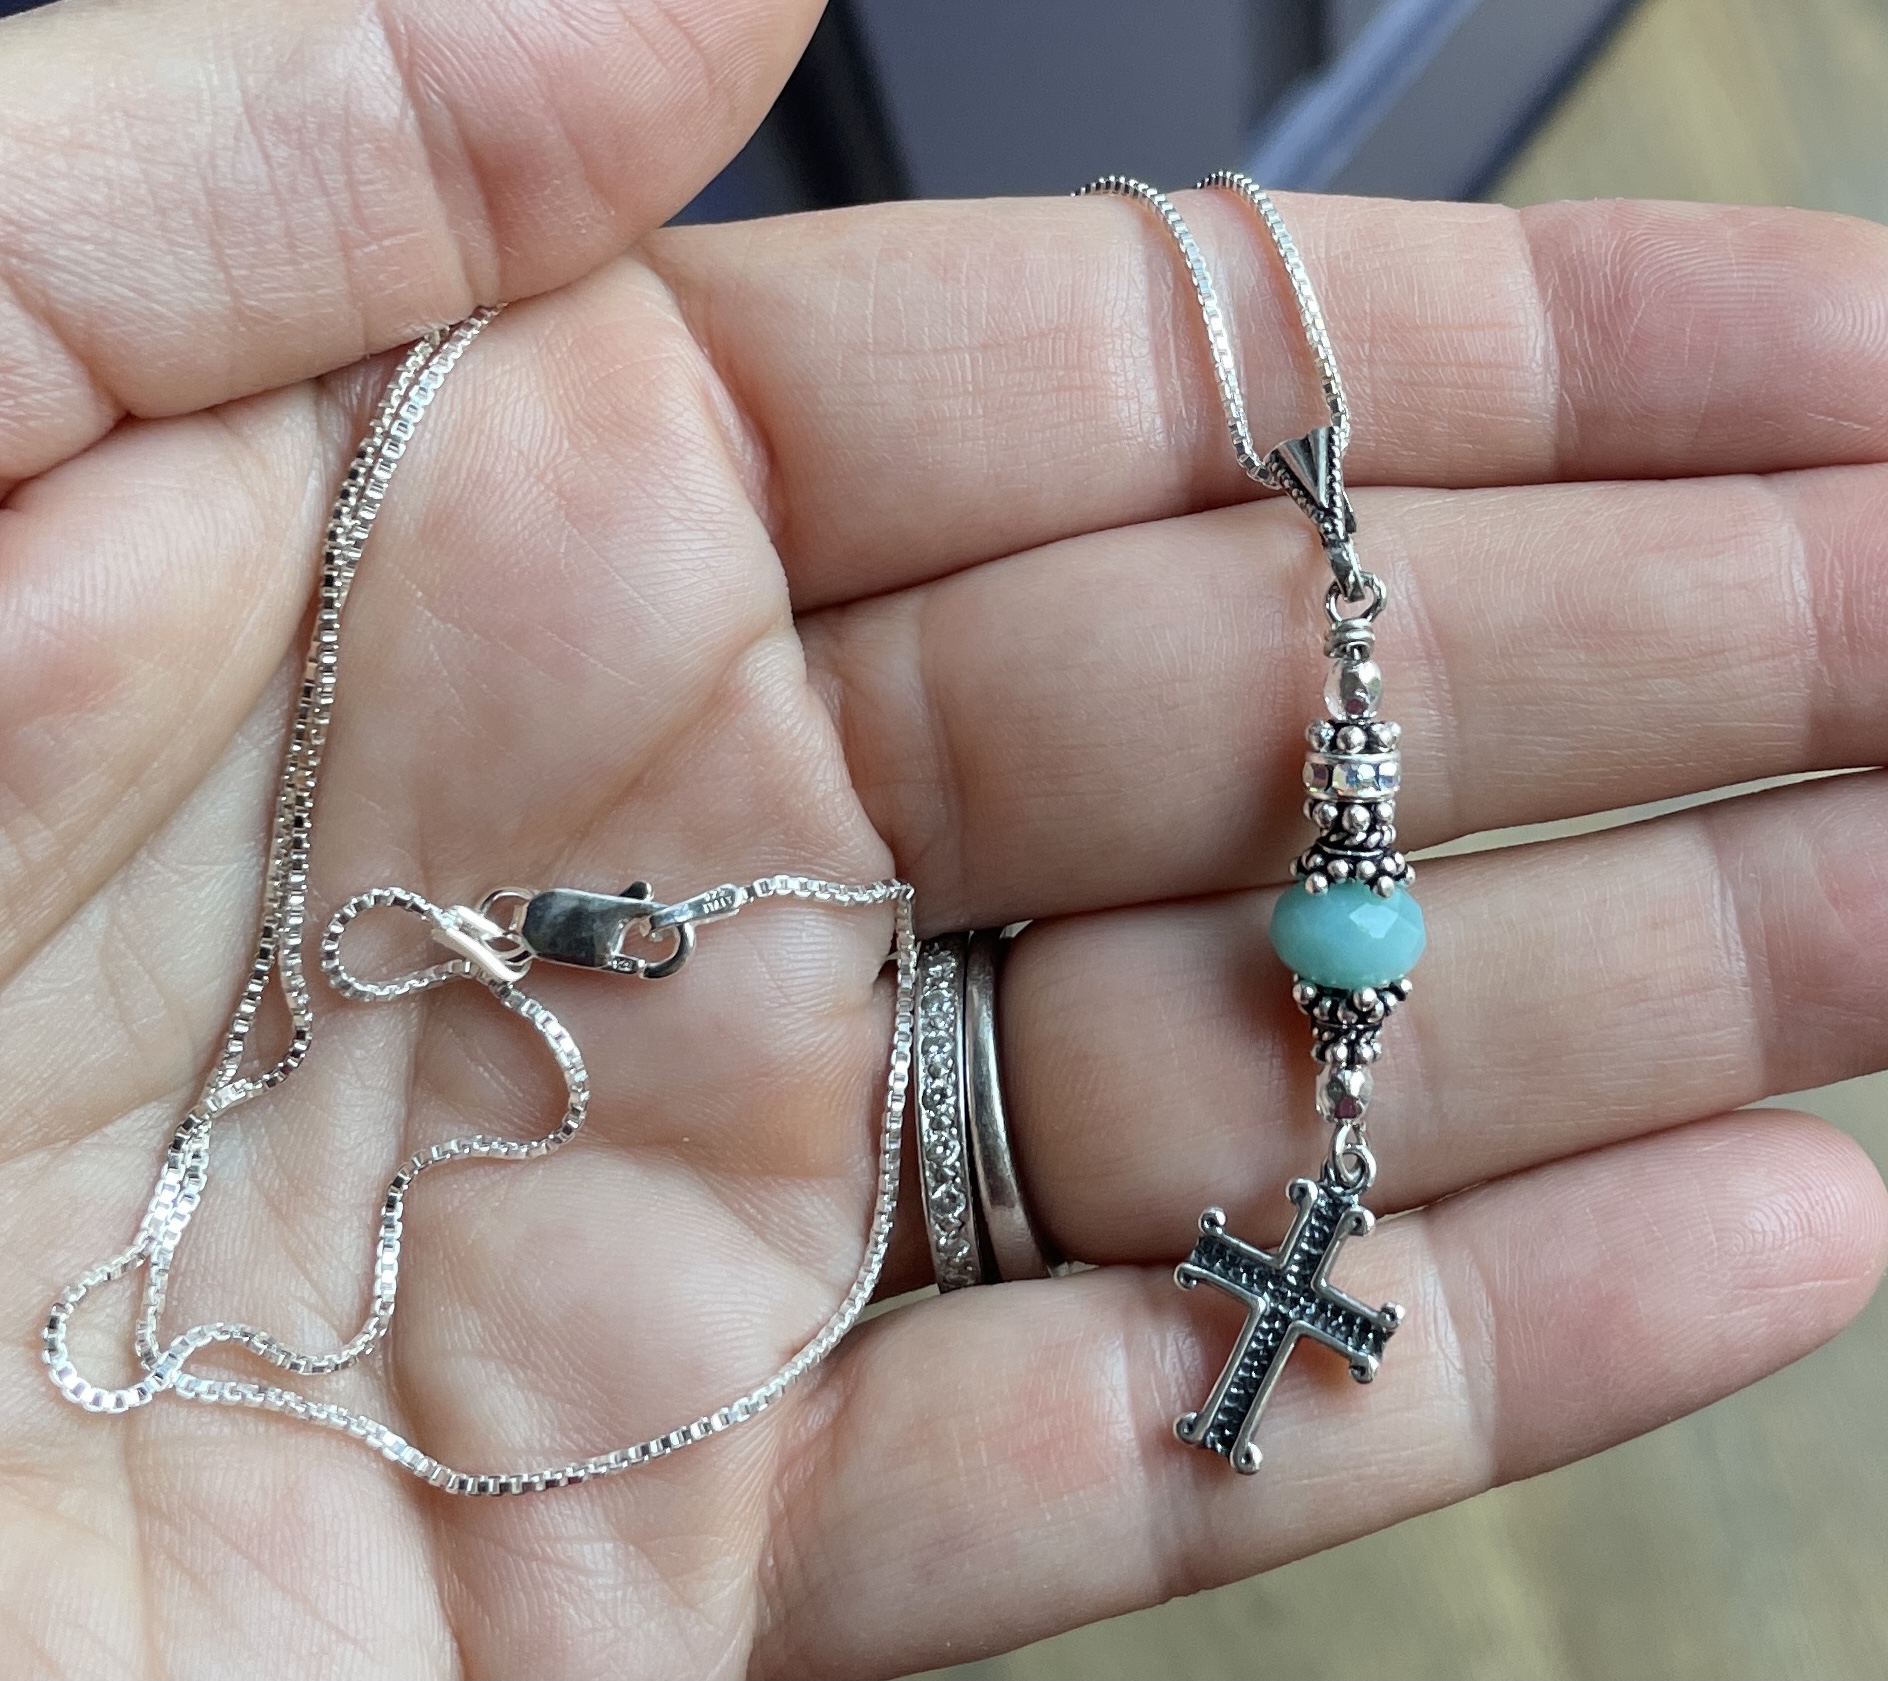 Old Sterling Silver Beaded Necklace With Silver Cross